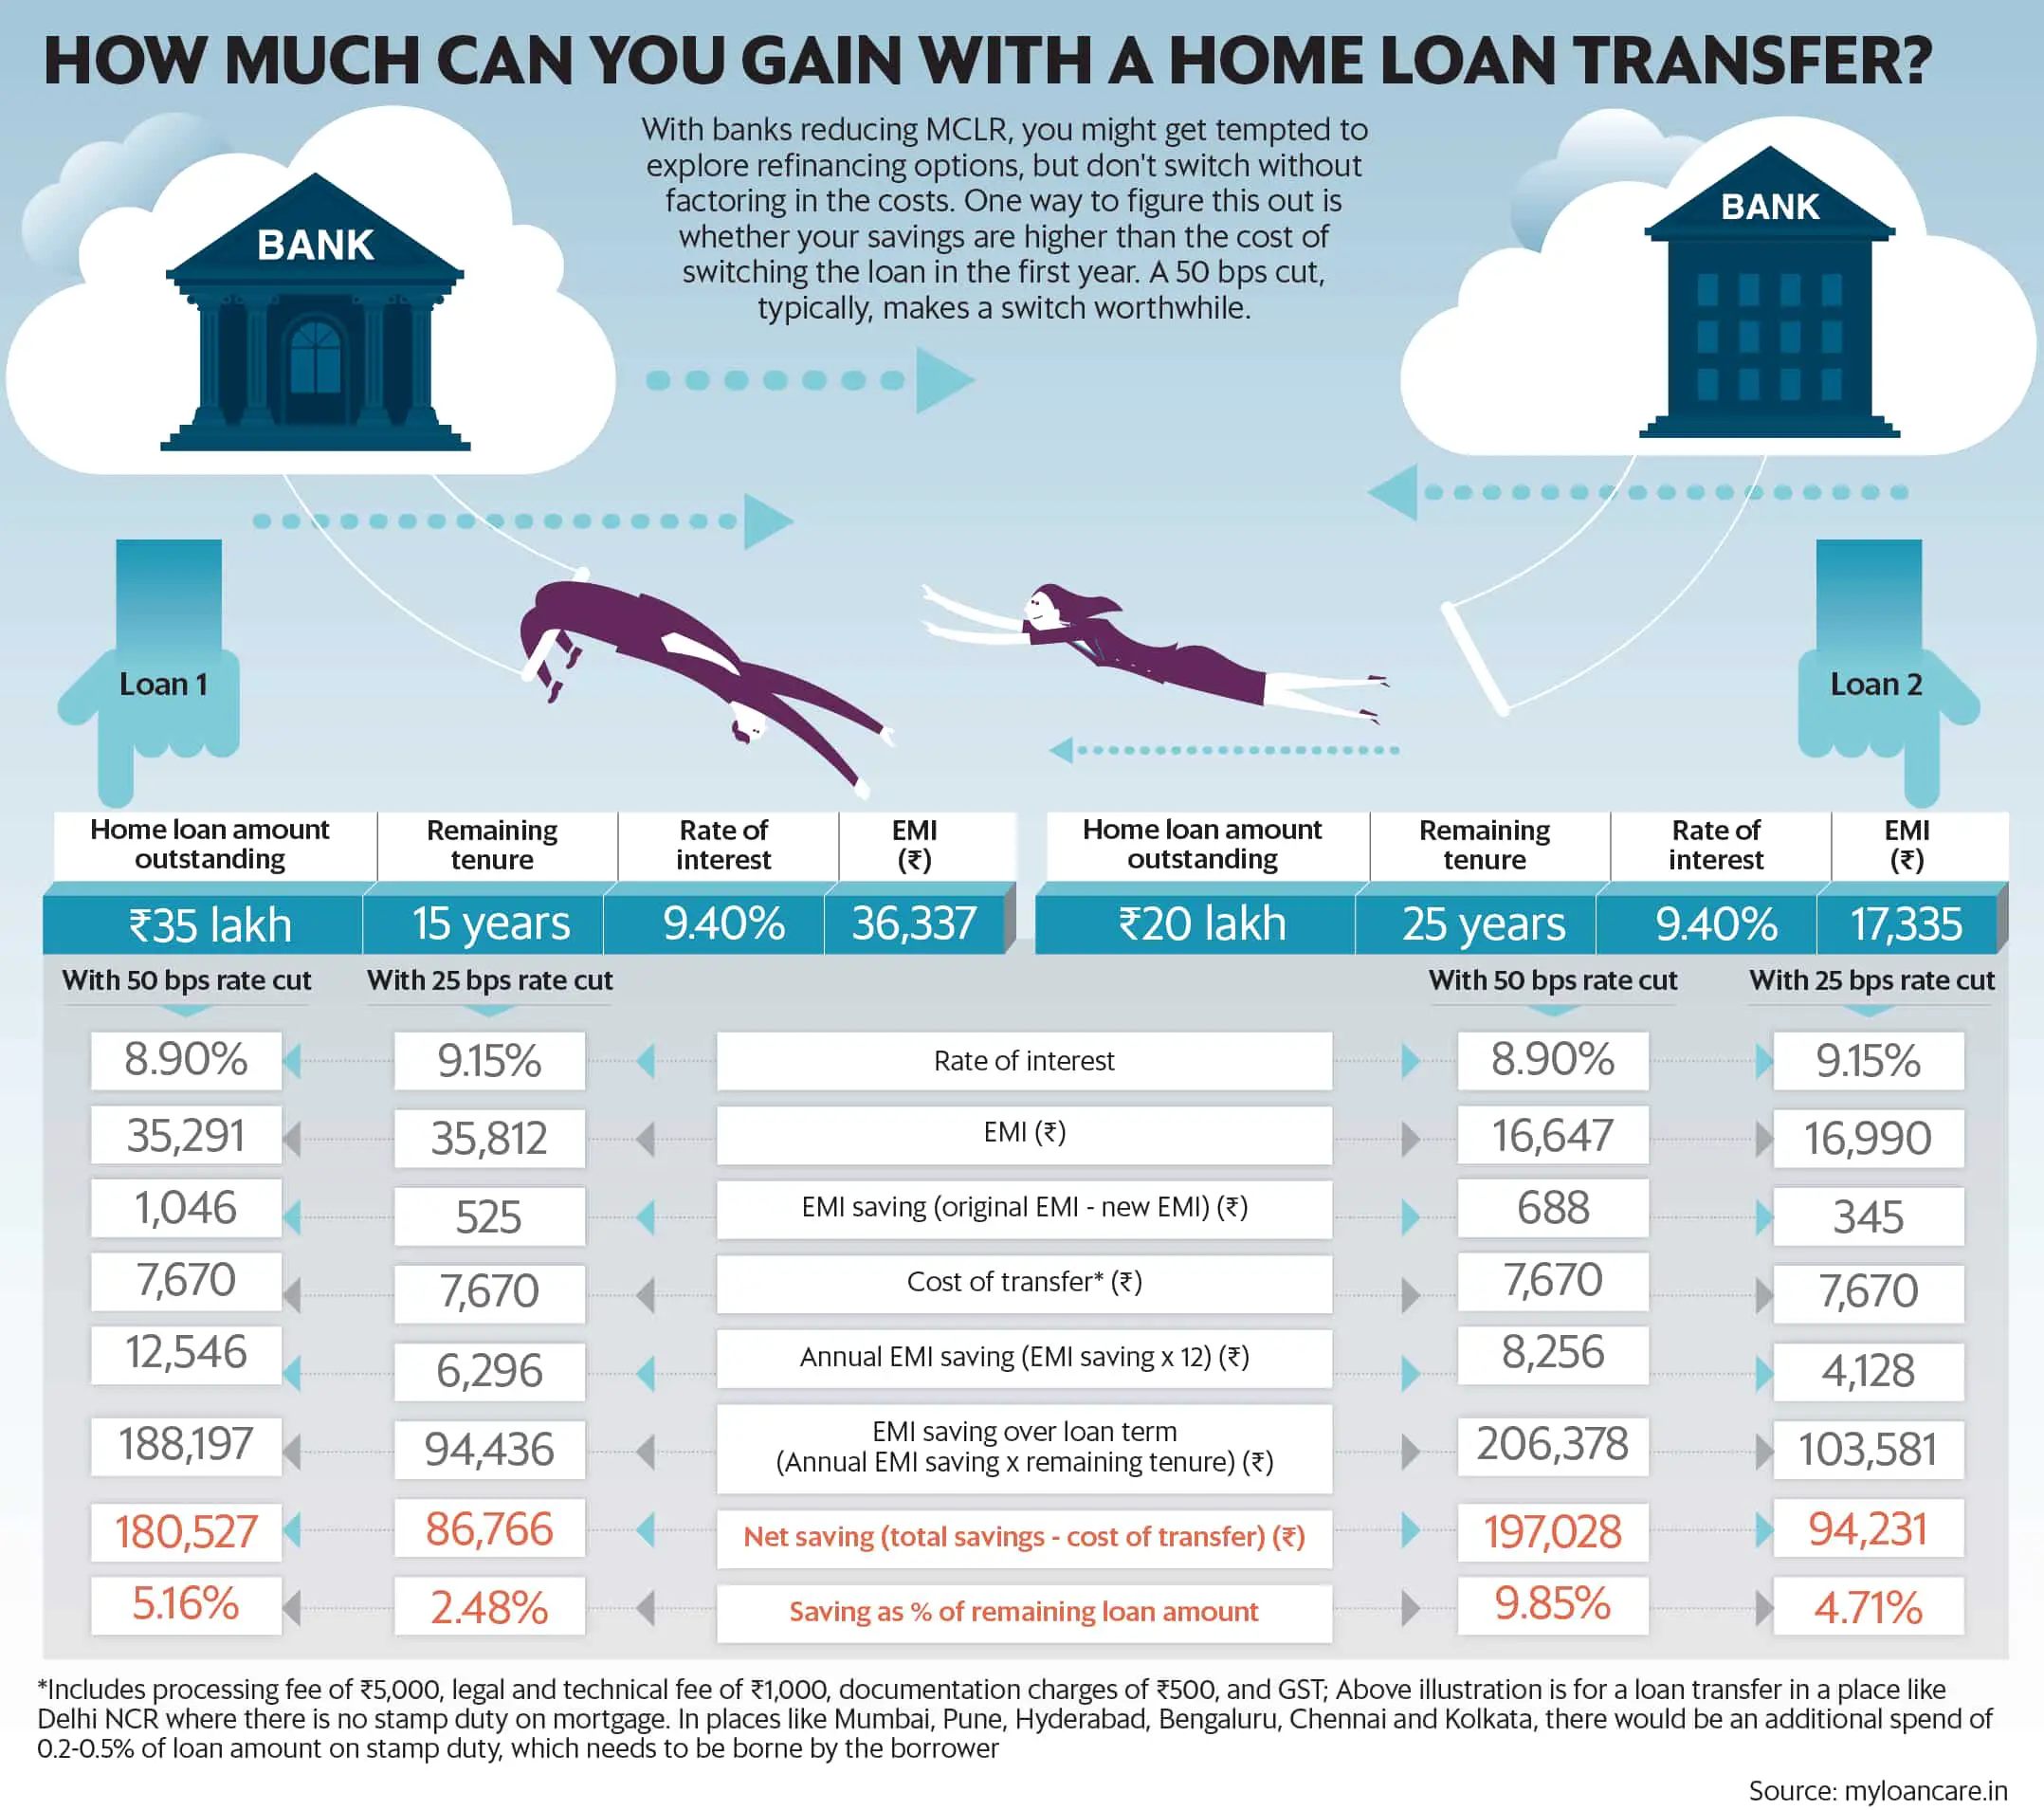 Banks revise rates, but dont transfer your home loan yet